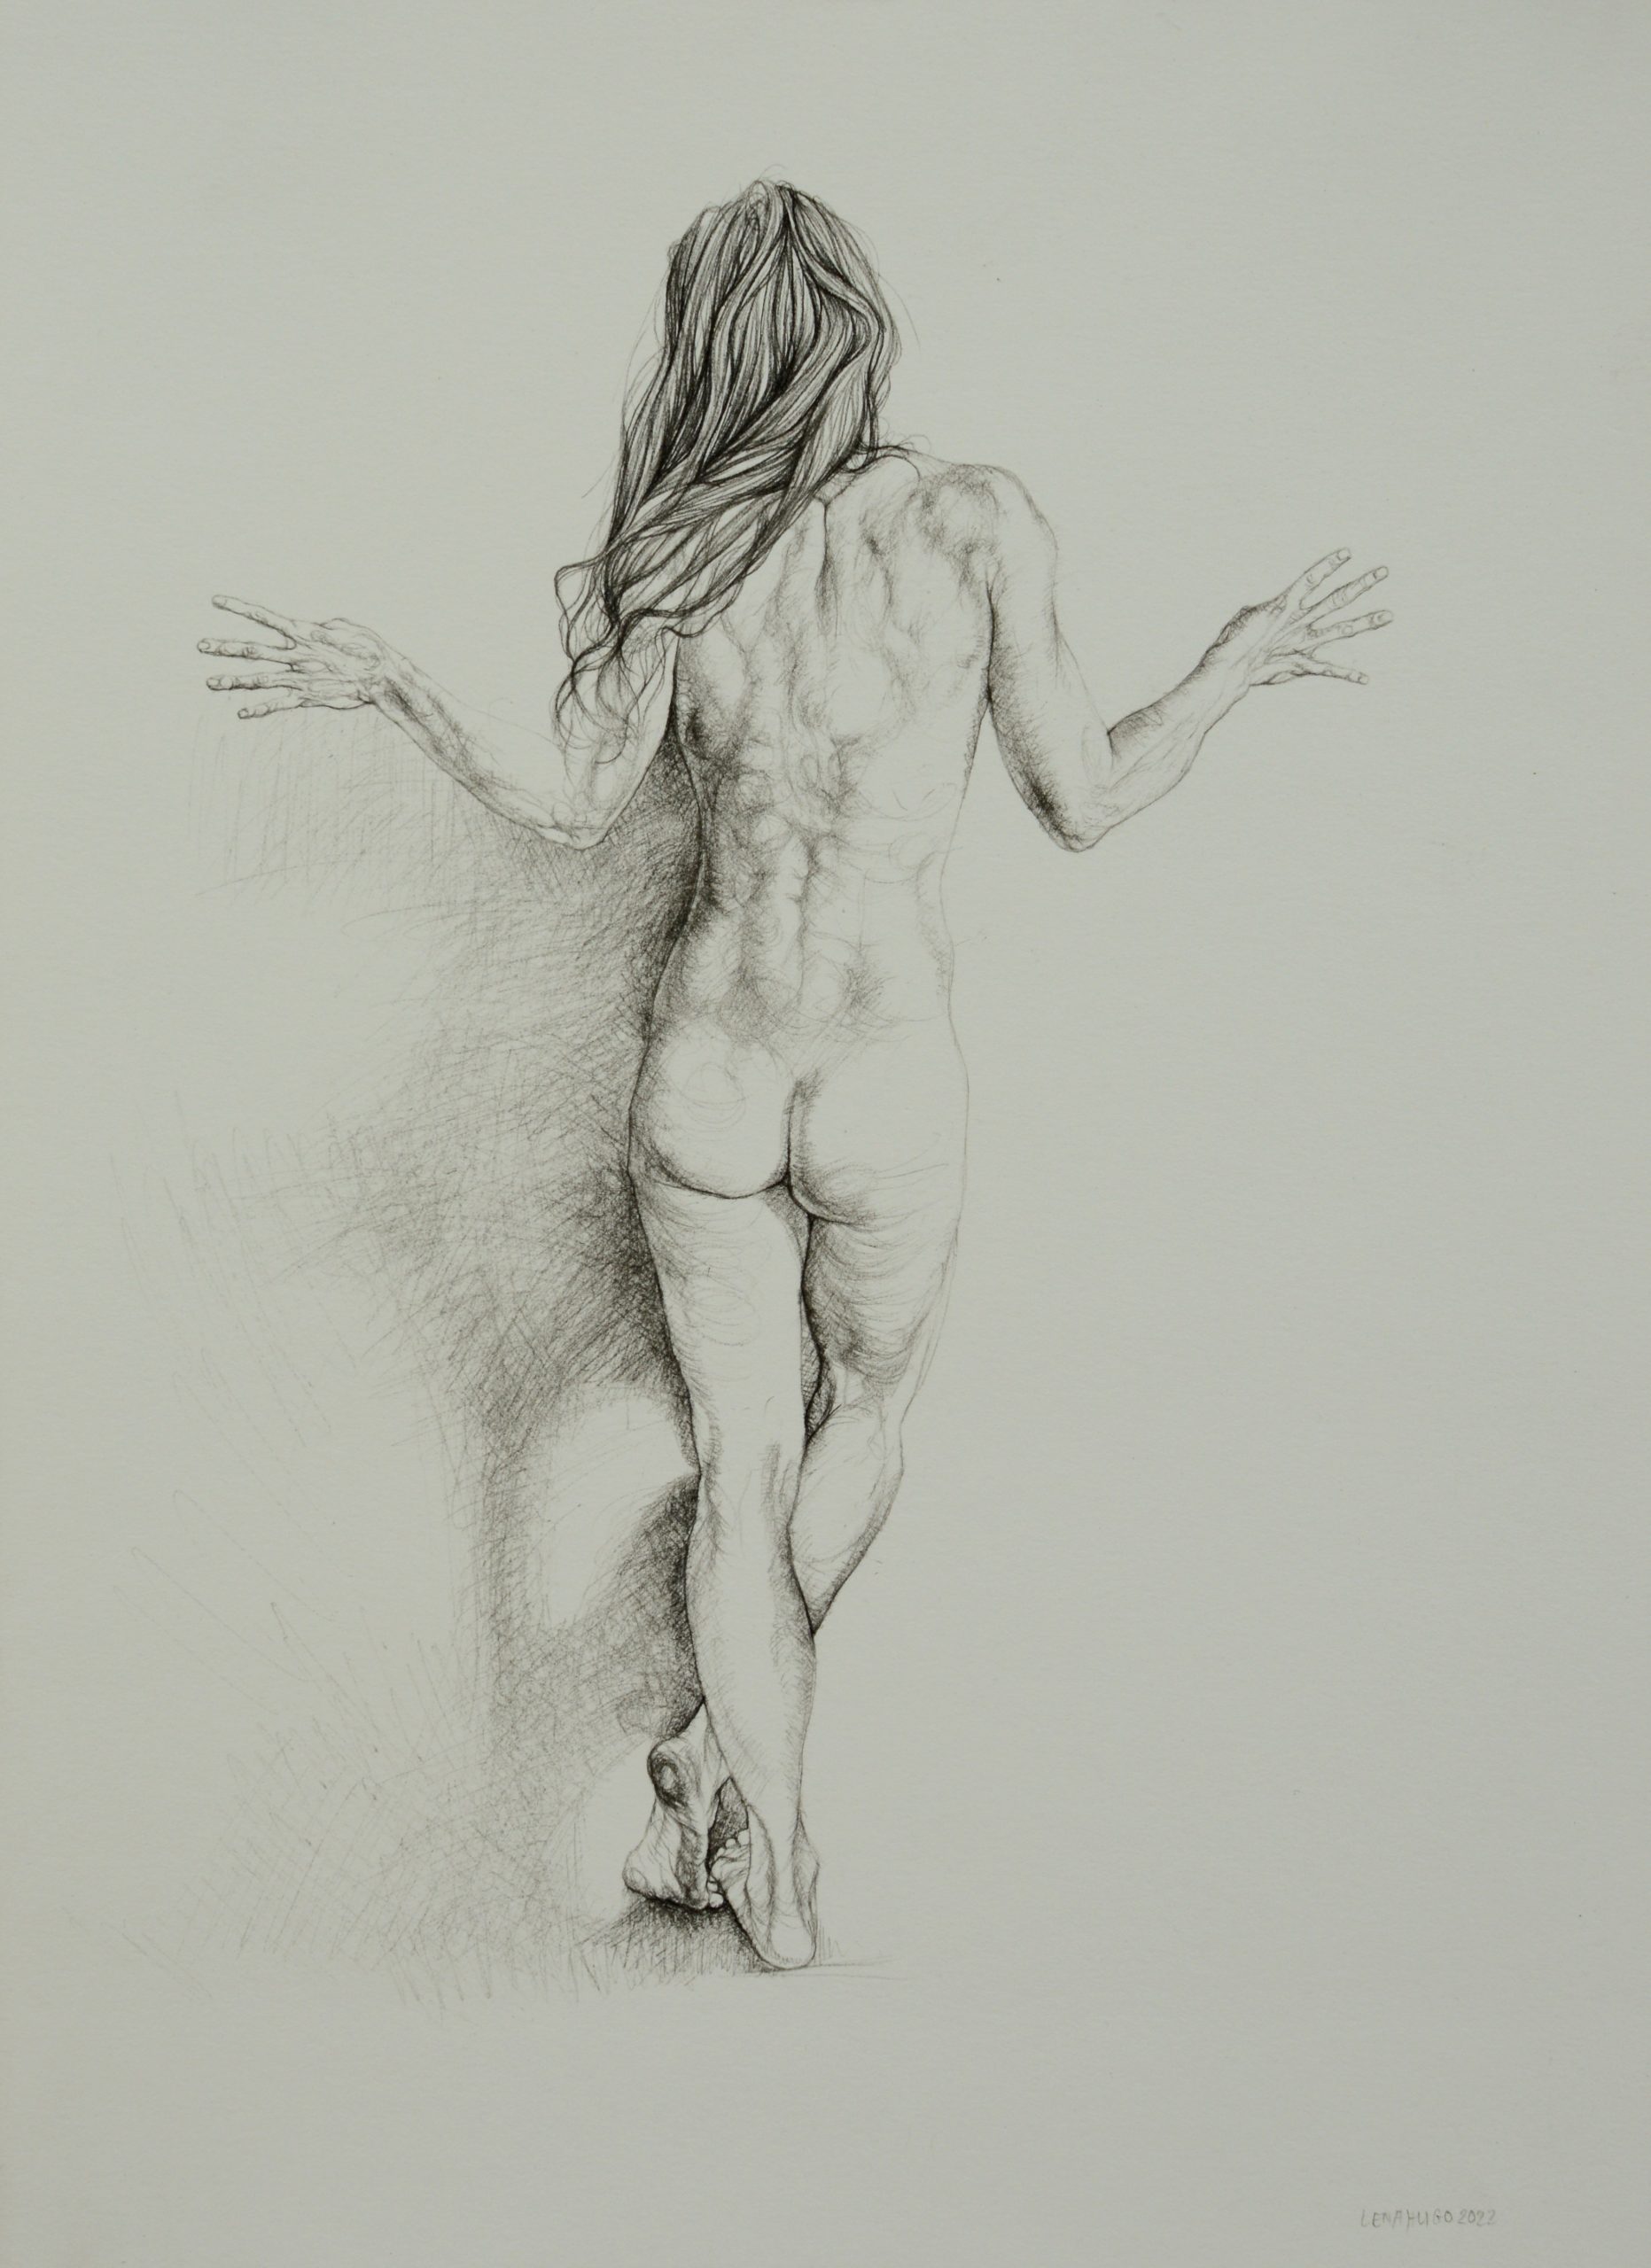 Pose as a Windswept Tree VI, 42cm x 30cm, woodless charcoal on paper